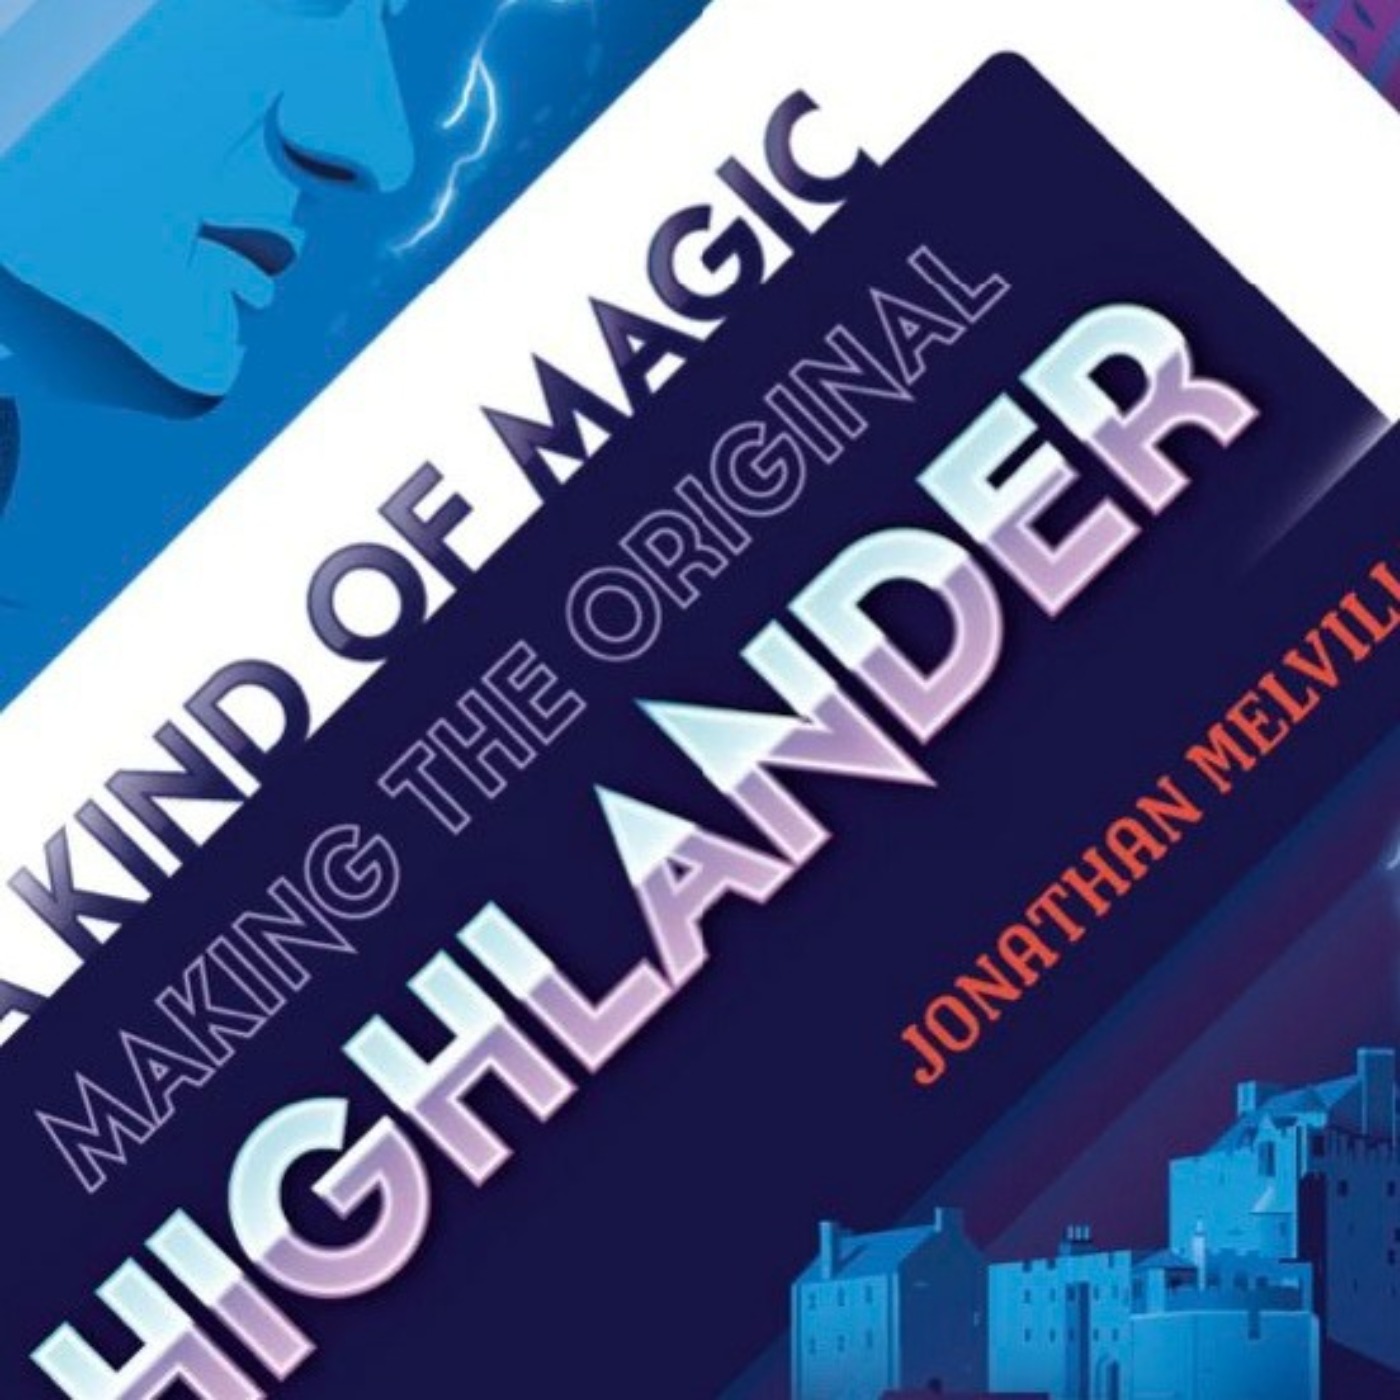 Highlander with author Jonathan Melville